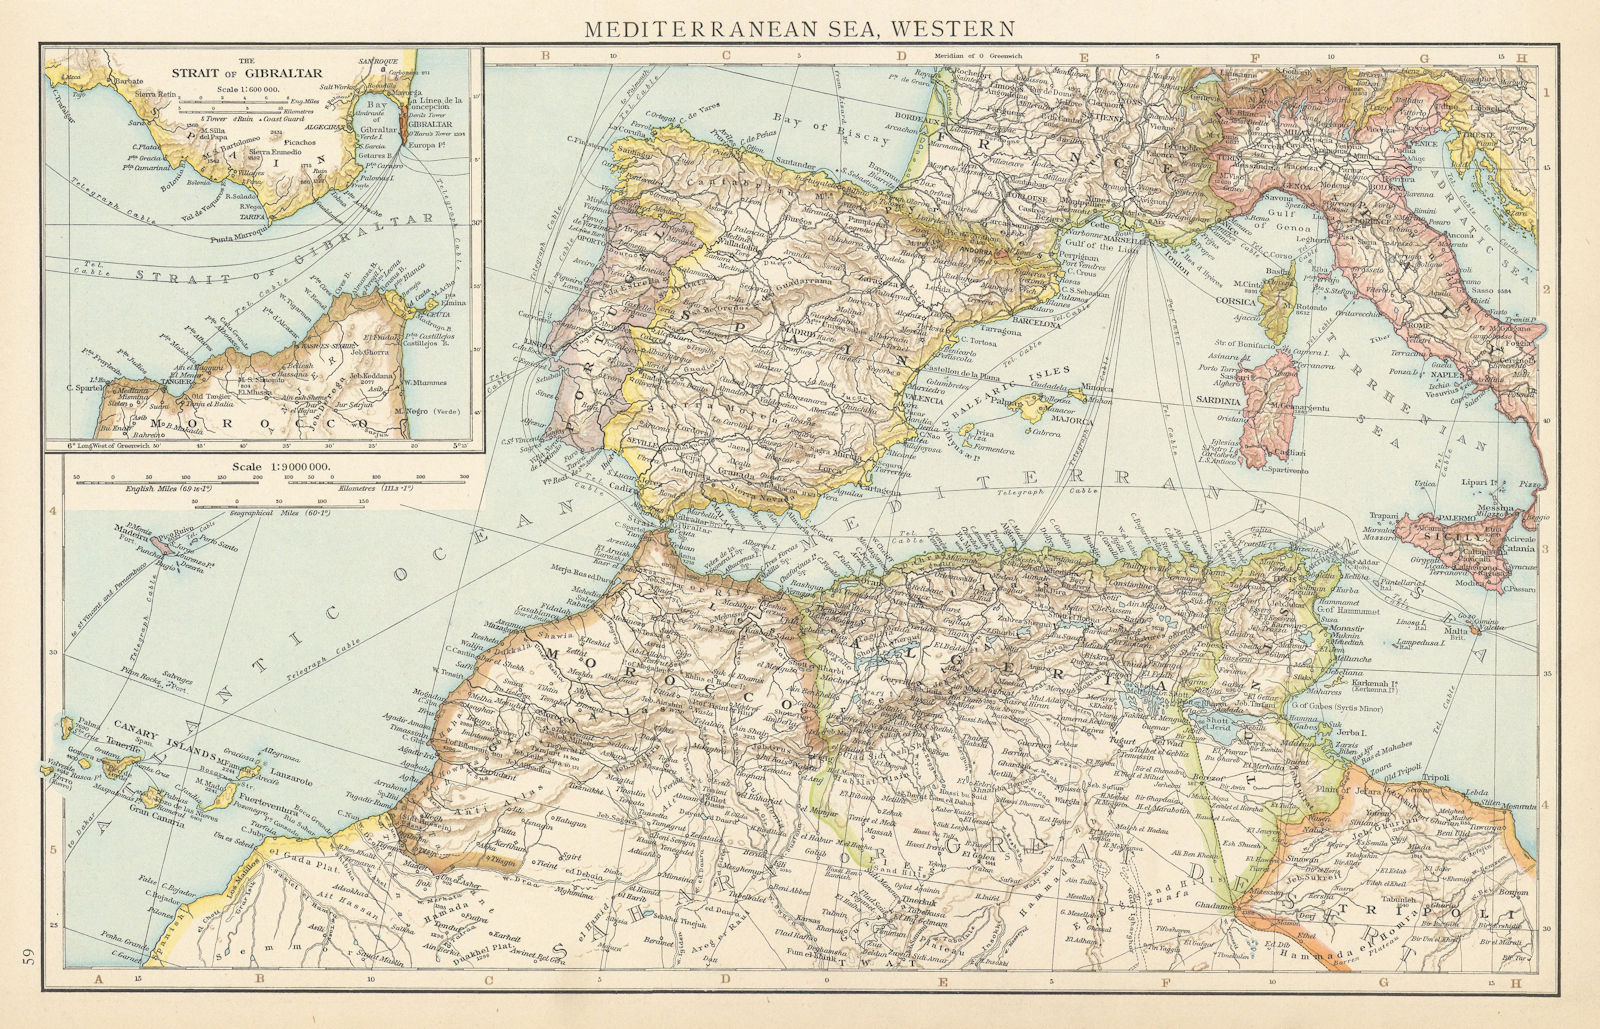 Western Mediterranean sea. Strait of Gibraltar. Telegraph cables. TIMES 1895 map